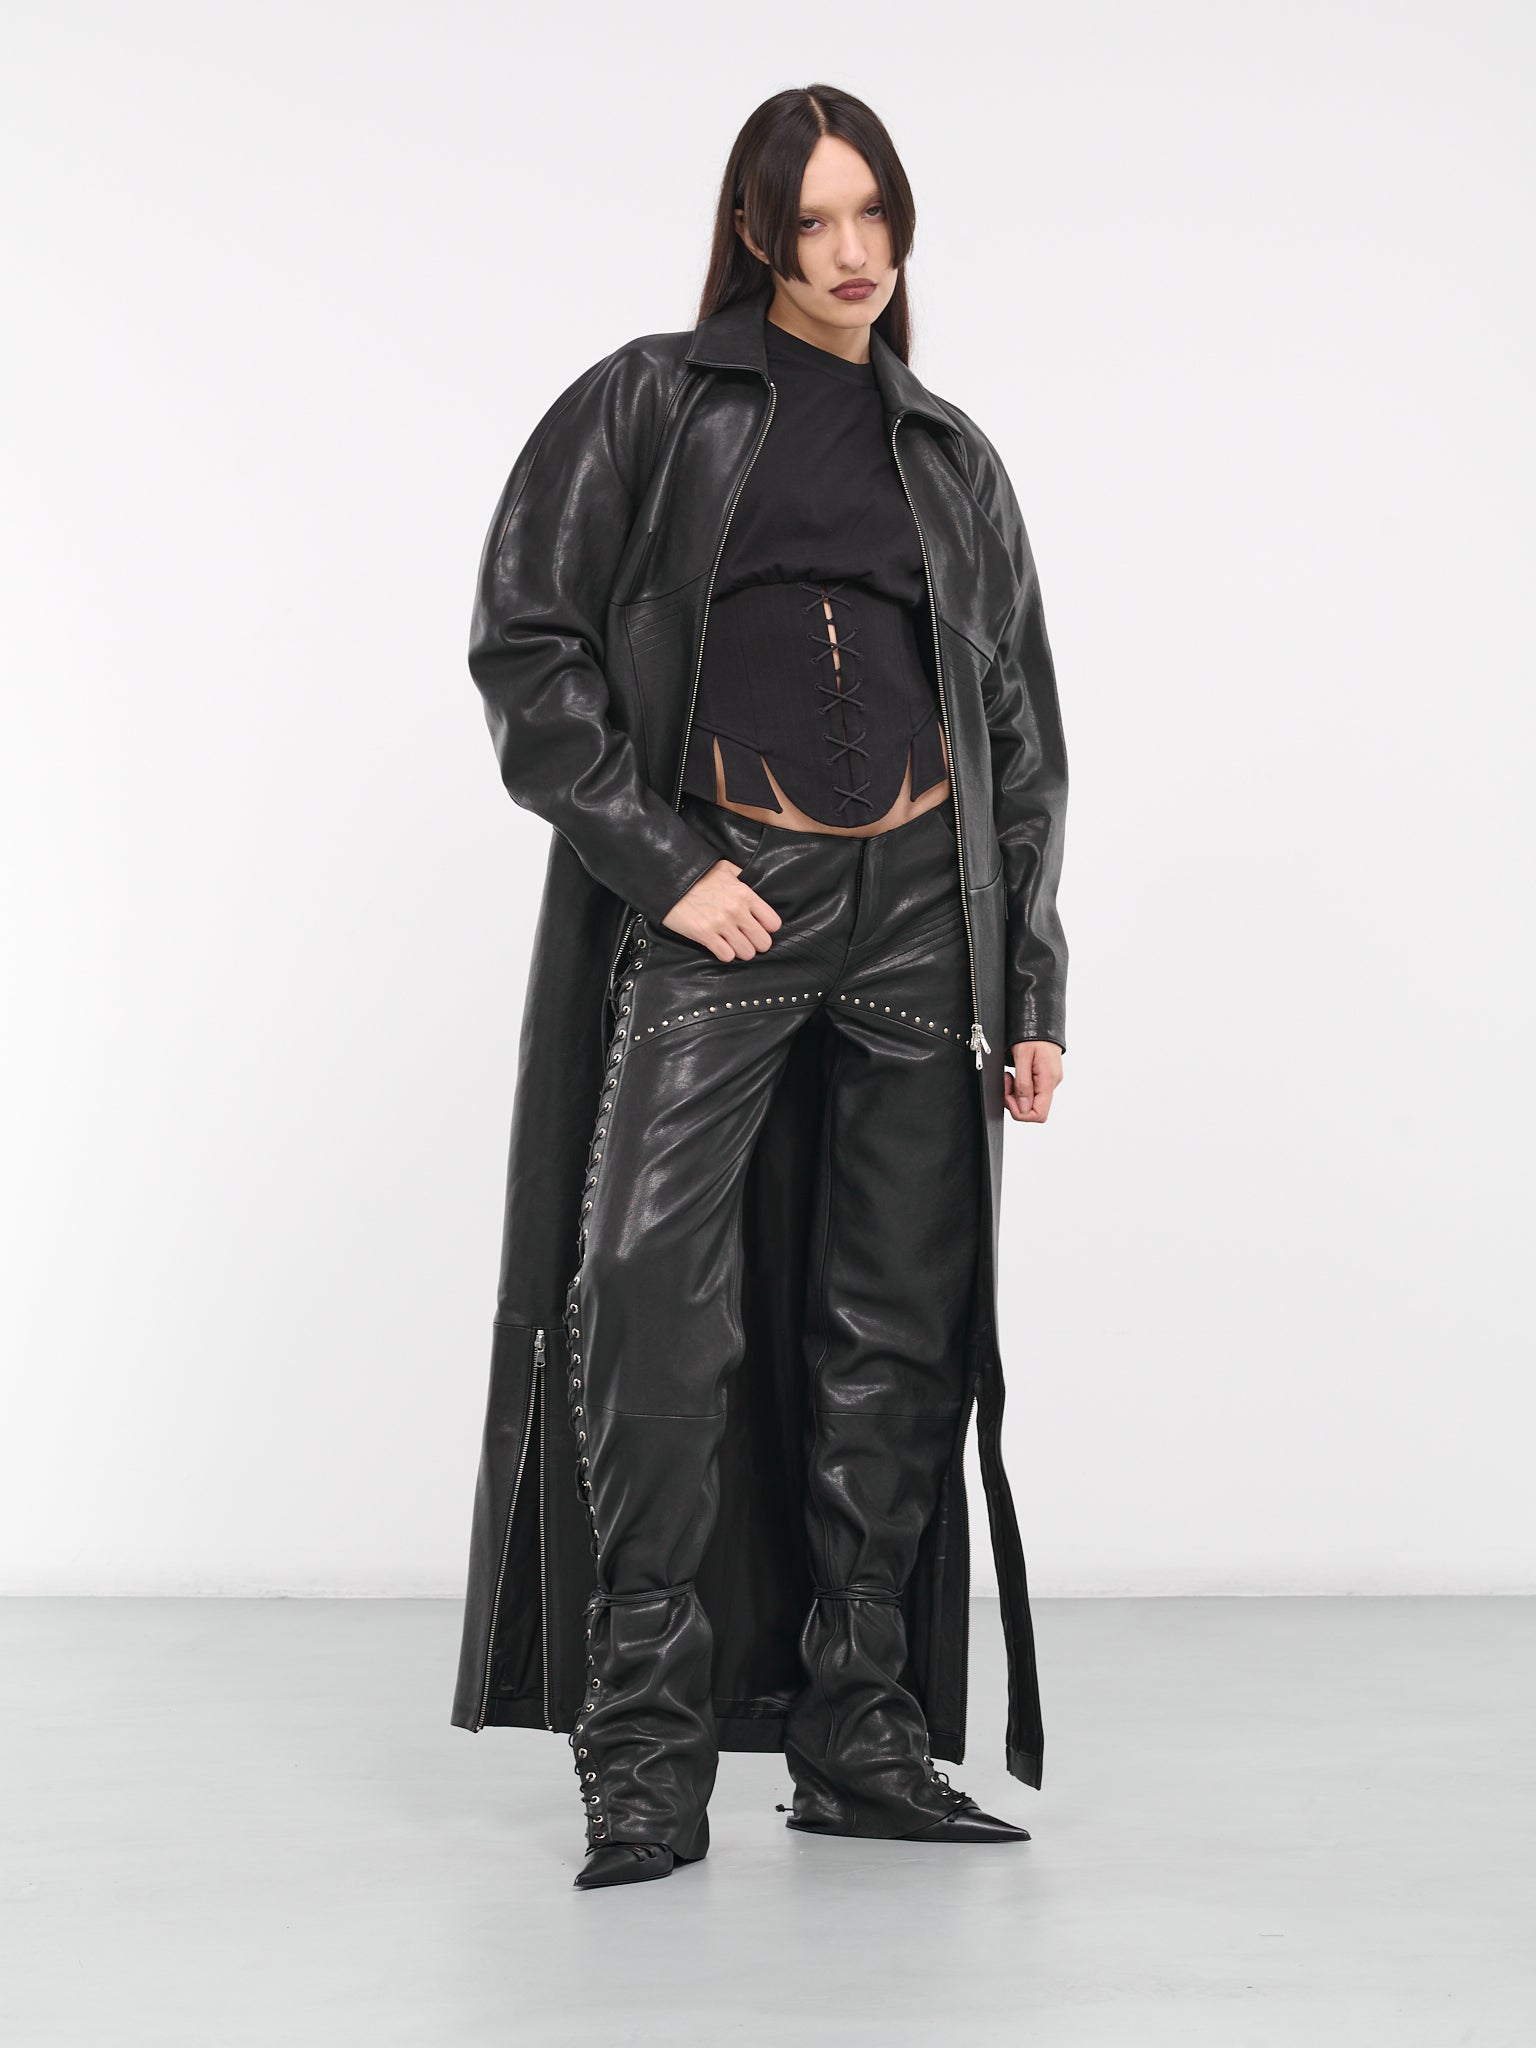 Hard Candy Leather Trousers (031-HARD-CANDY-BLACK)